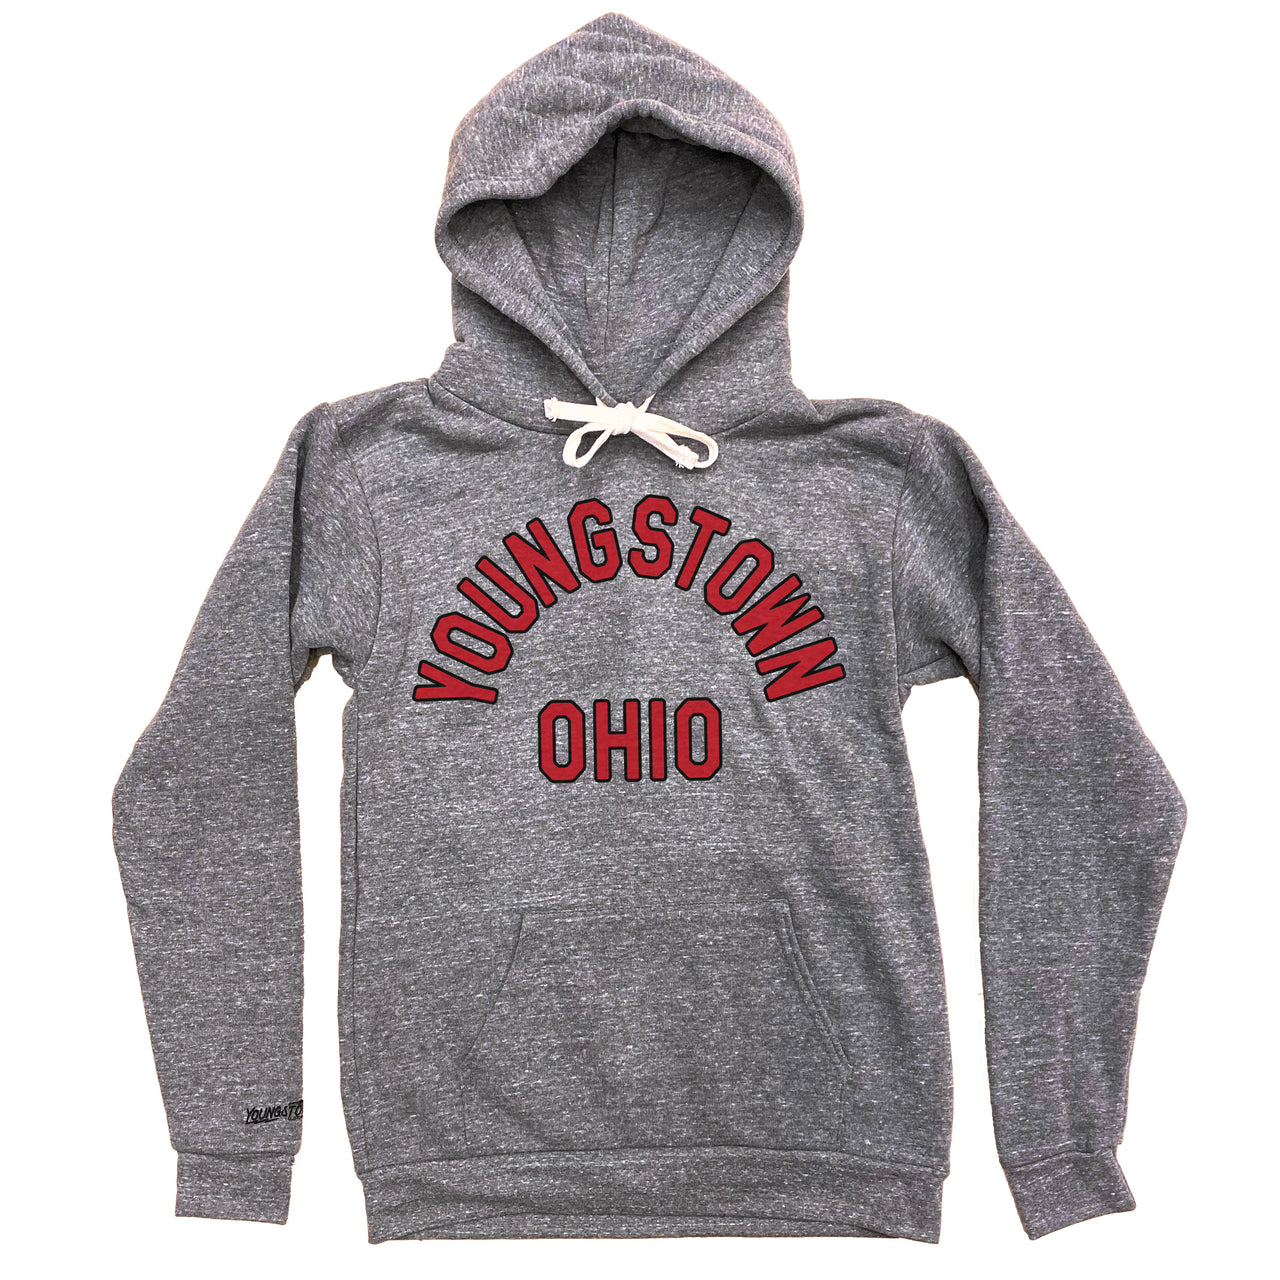 Youngstown Ohio Hoodie